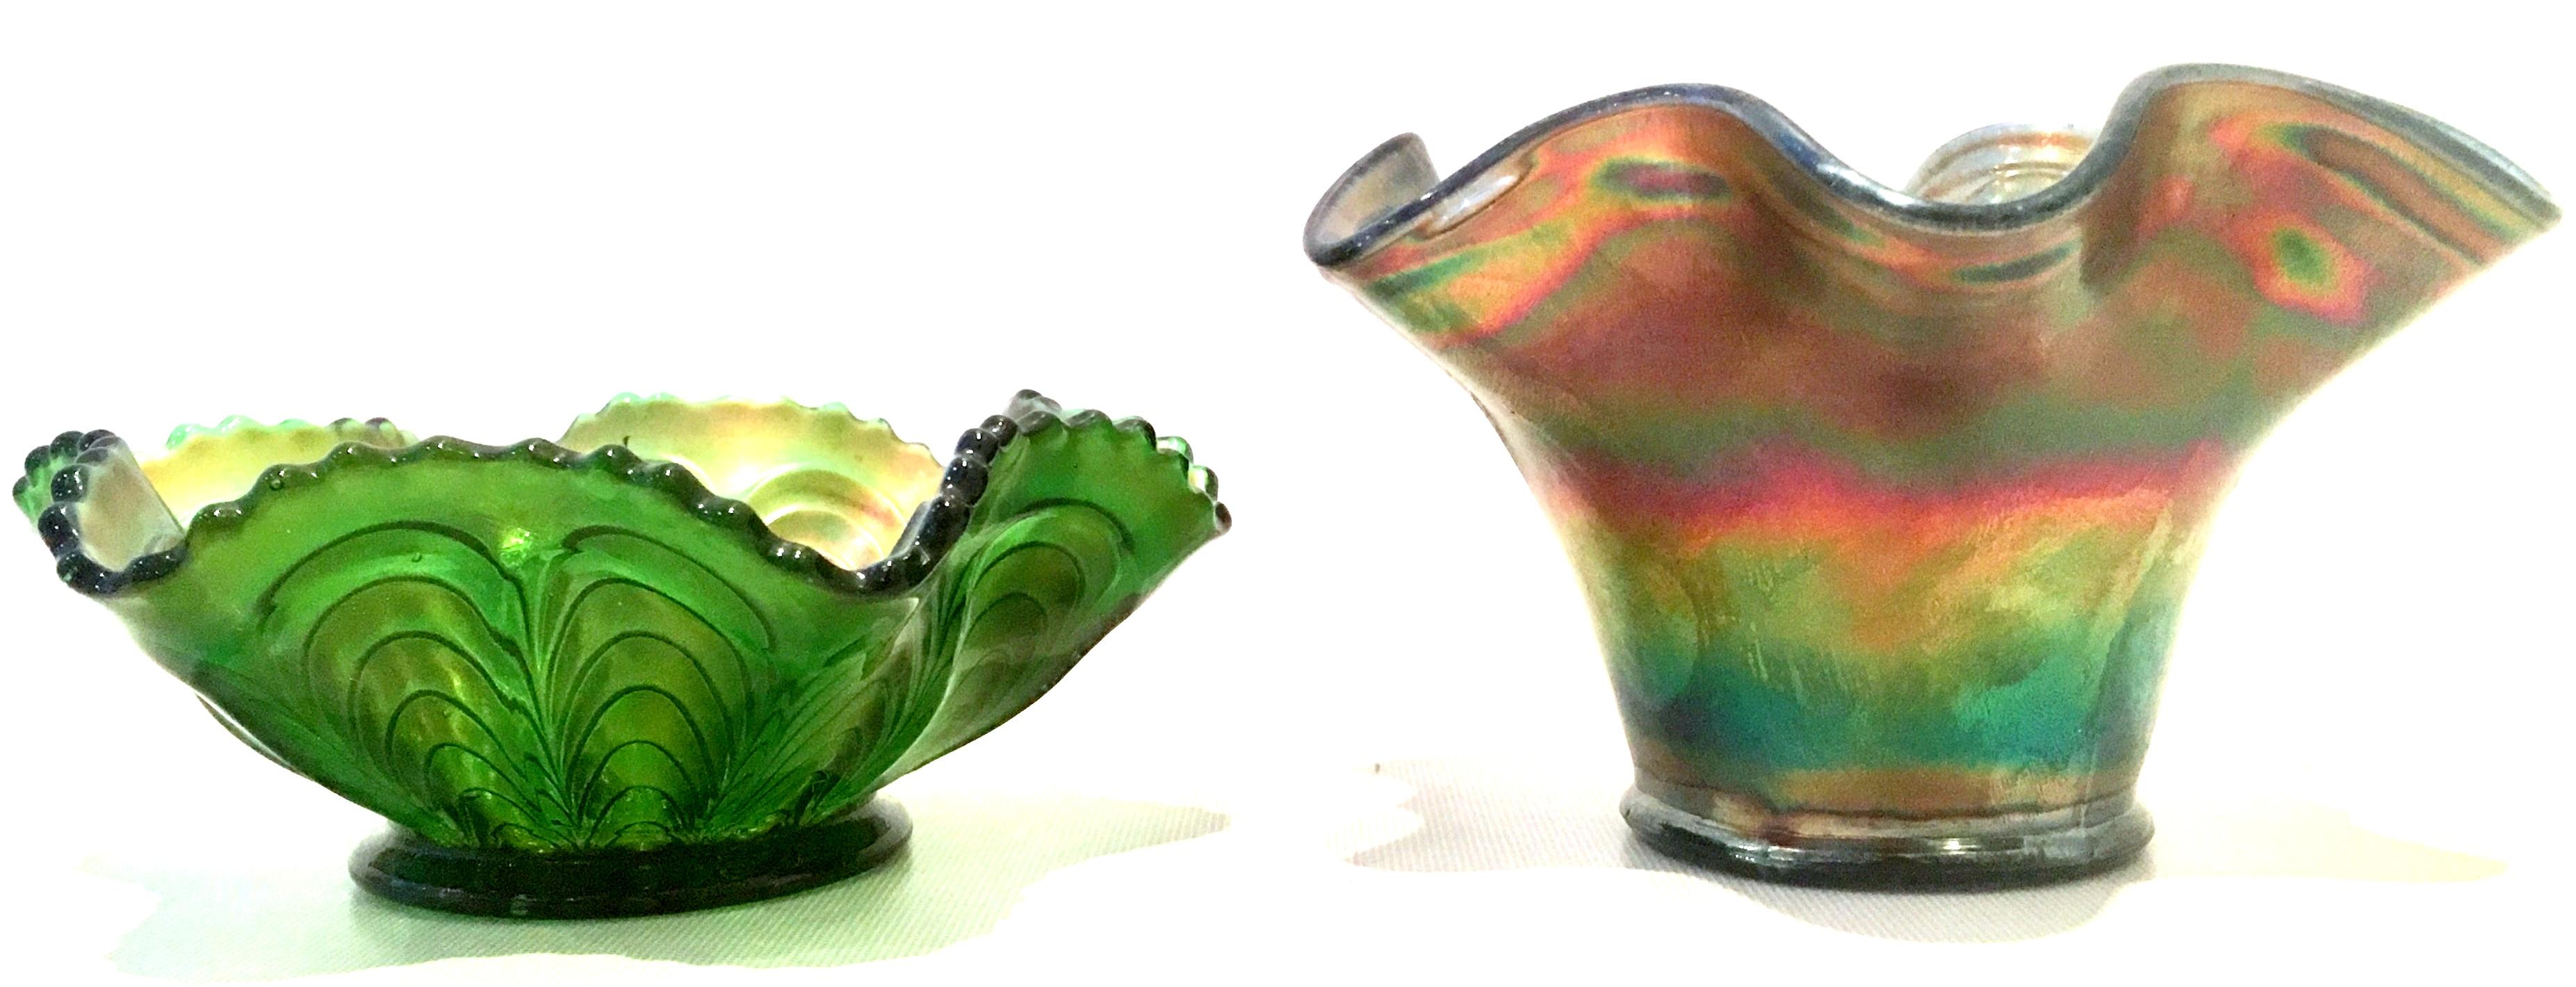 Antique set of two art Nouveau American art glass iridescent six point ruffle bowls. The shorter bowl is green iridescent and has a raised pulled feather motif. The taller is blue iridescent with a raised fauna and berry motif.
The green bowl